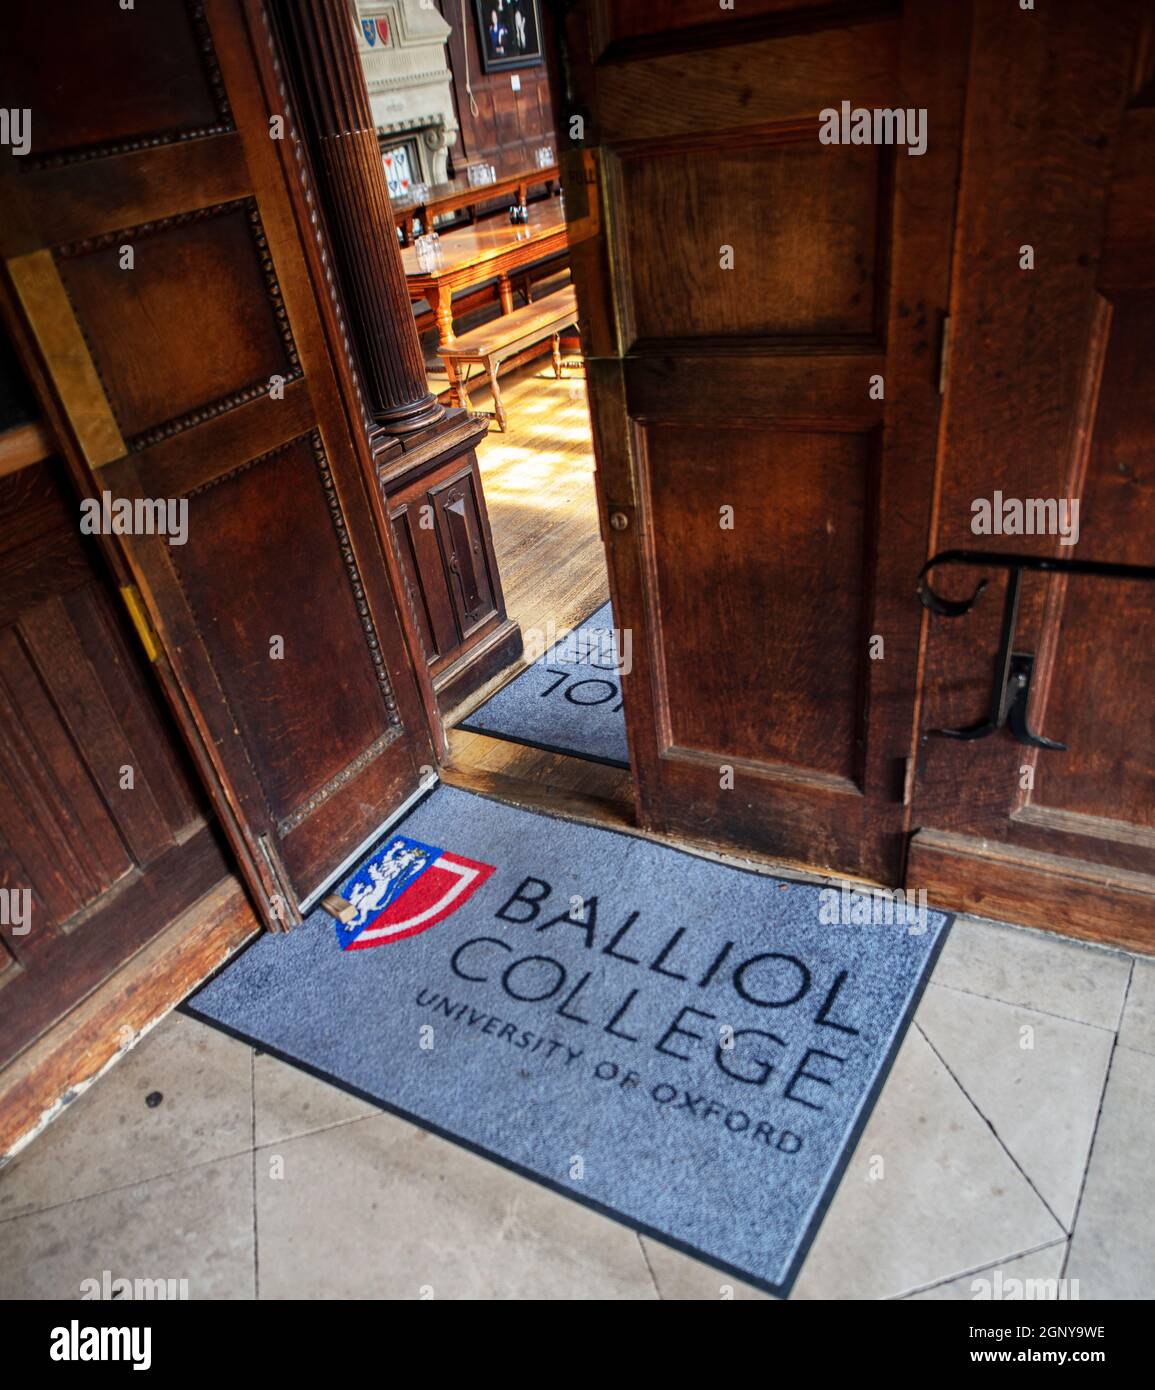 Balliol College, Oxford, one of the constituent Colleges of Oxford University, founded in 1263; rug printed with college crest at entrance to the Hall Stock Photo